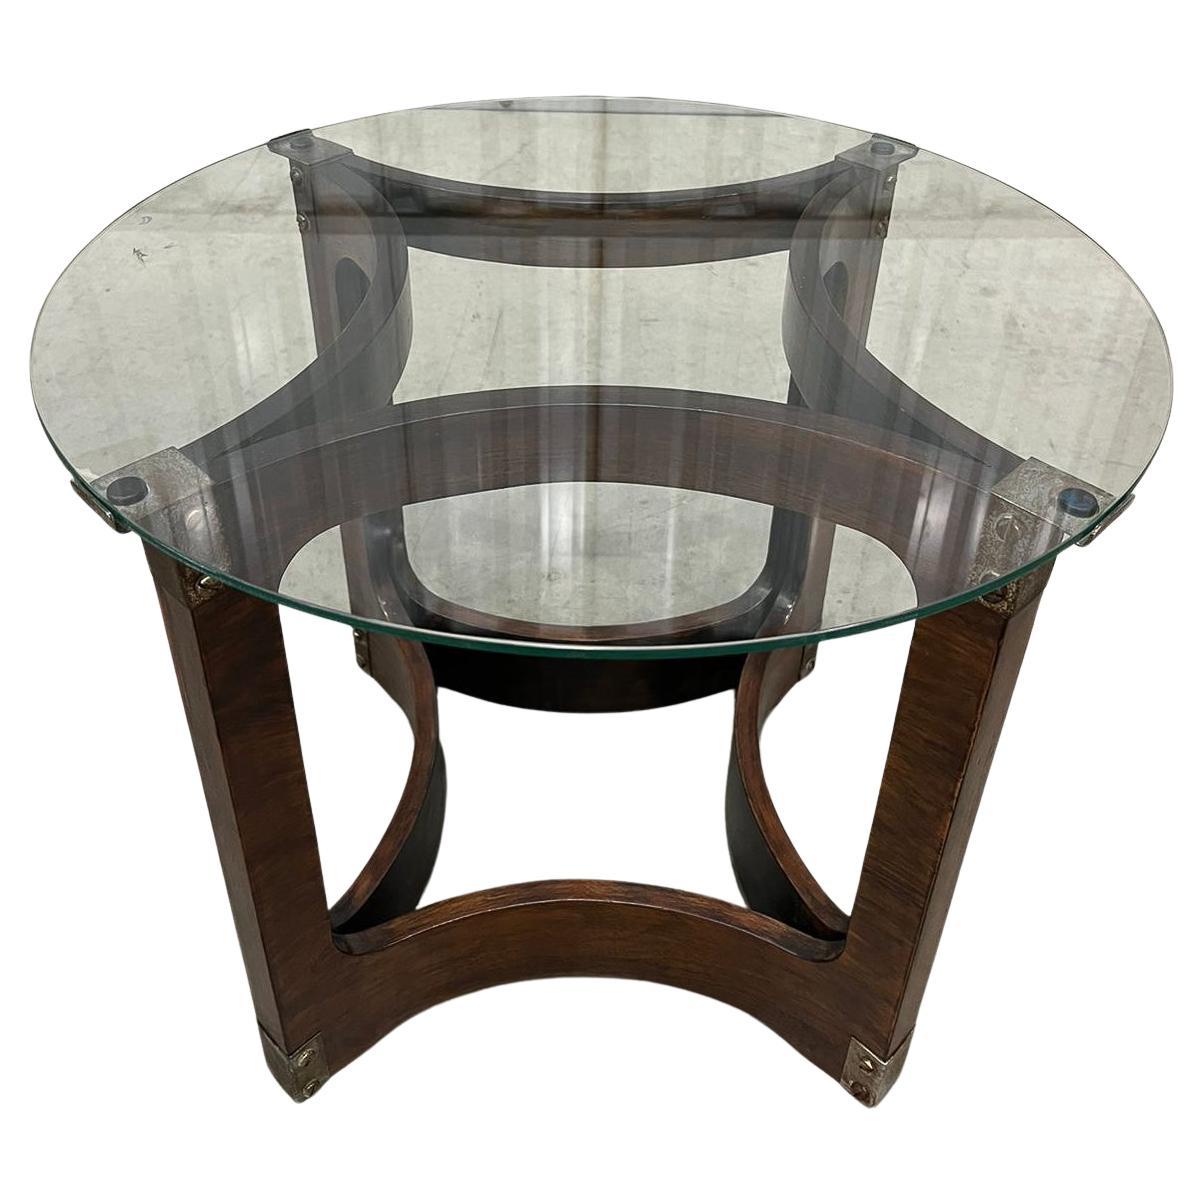 Mid-Century Modern Side Table in Bentwood & Glass by Novo Rumo, 1960s, Brazil For Sale